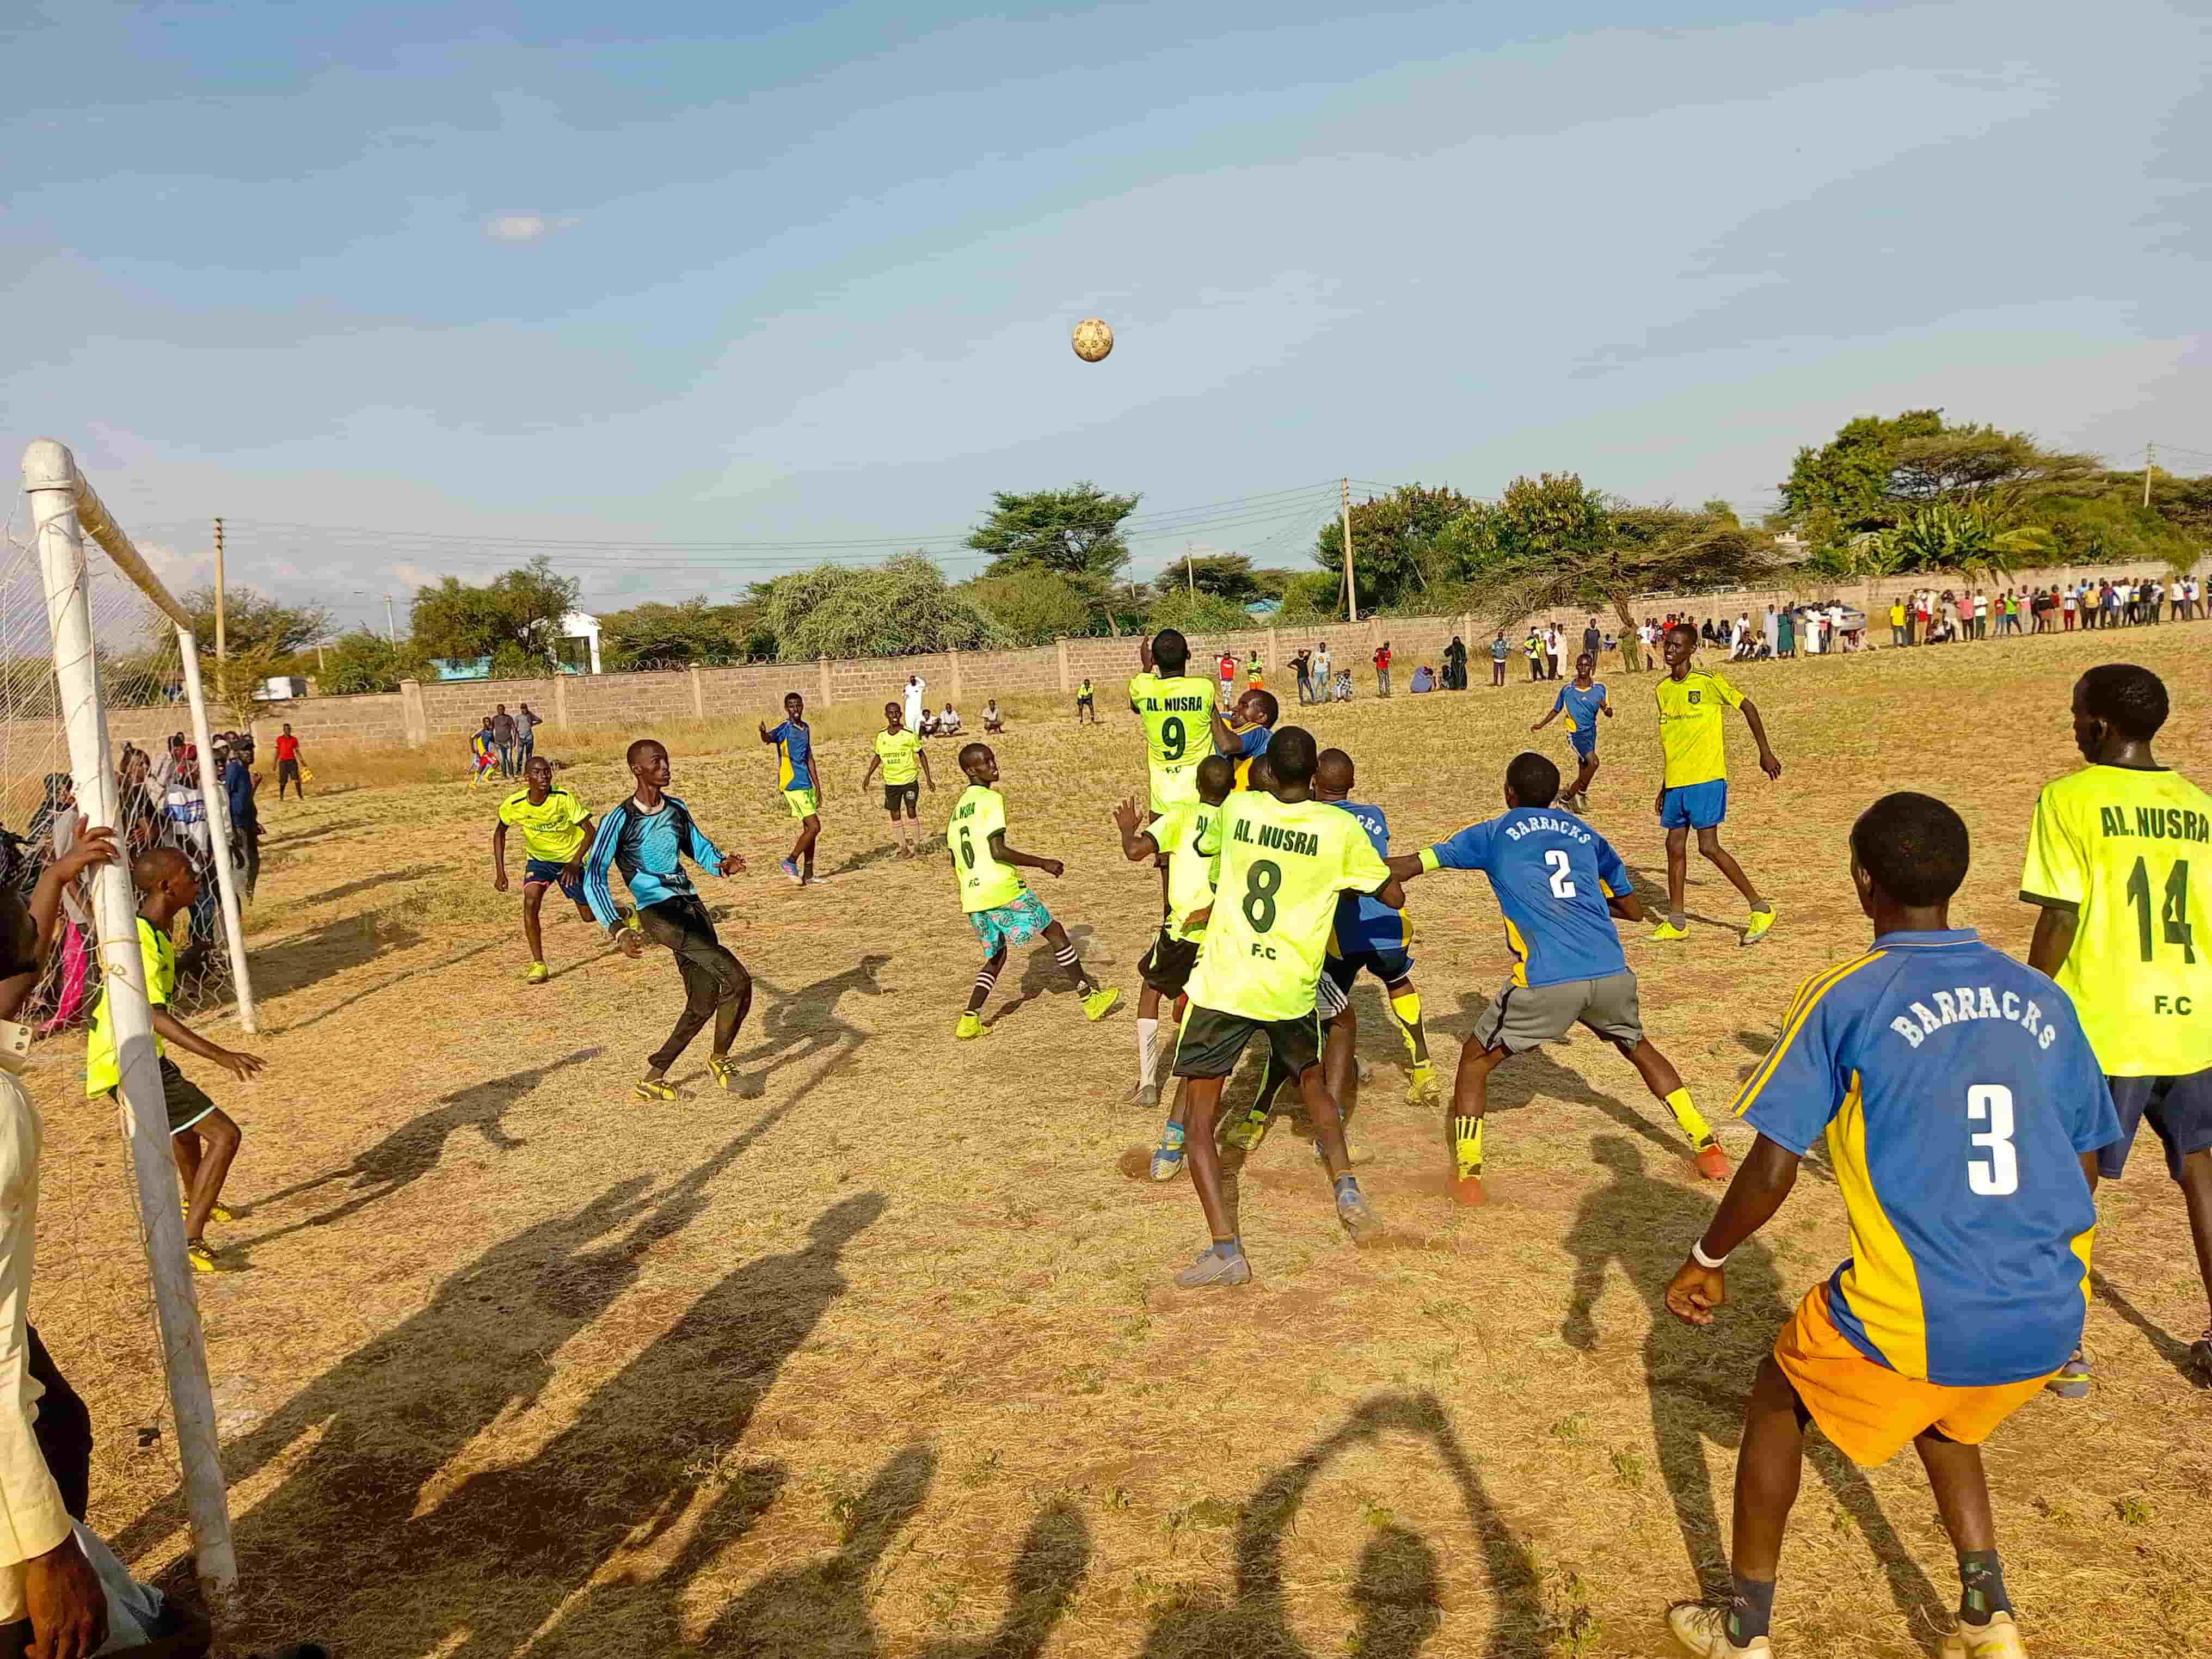 Isiolo Barracks FC qualifies for regional Under 19 championships